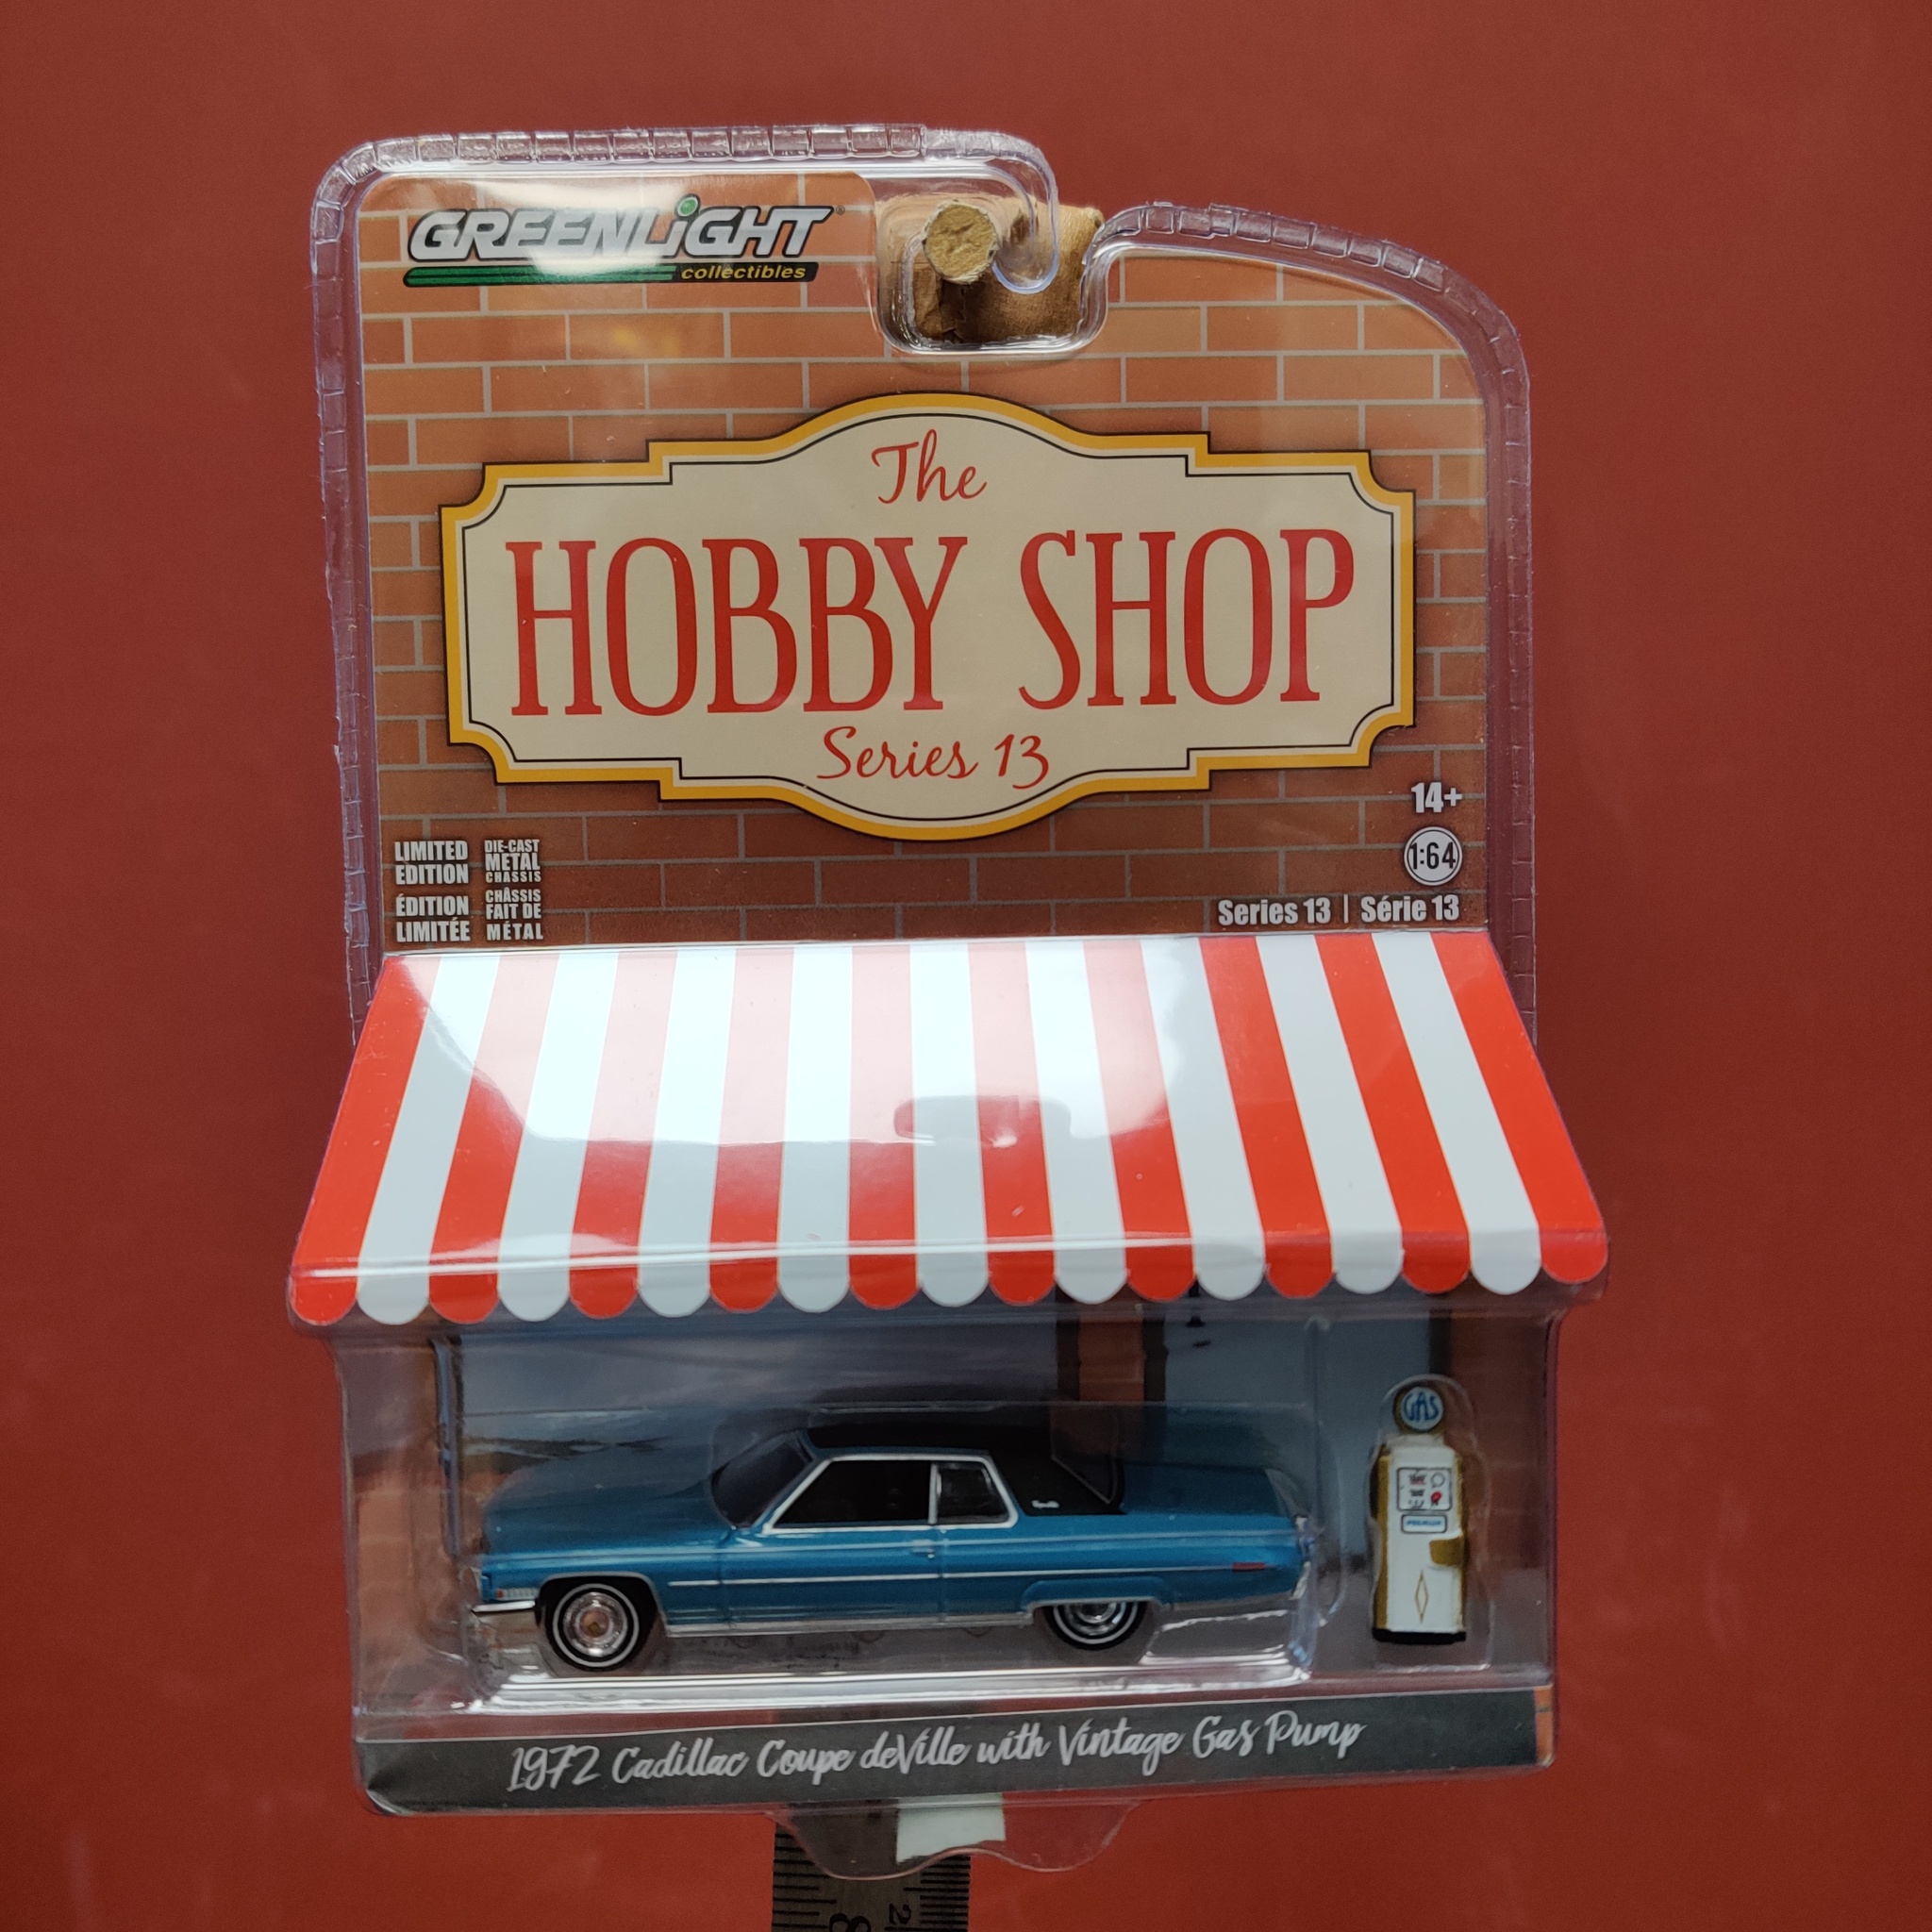 Skala 1/64 Cadillac Coupe DeVille 72' m pump "The hobby shop s.13" fr Greenlight